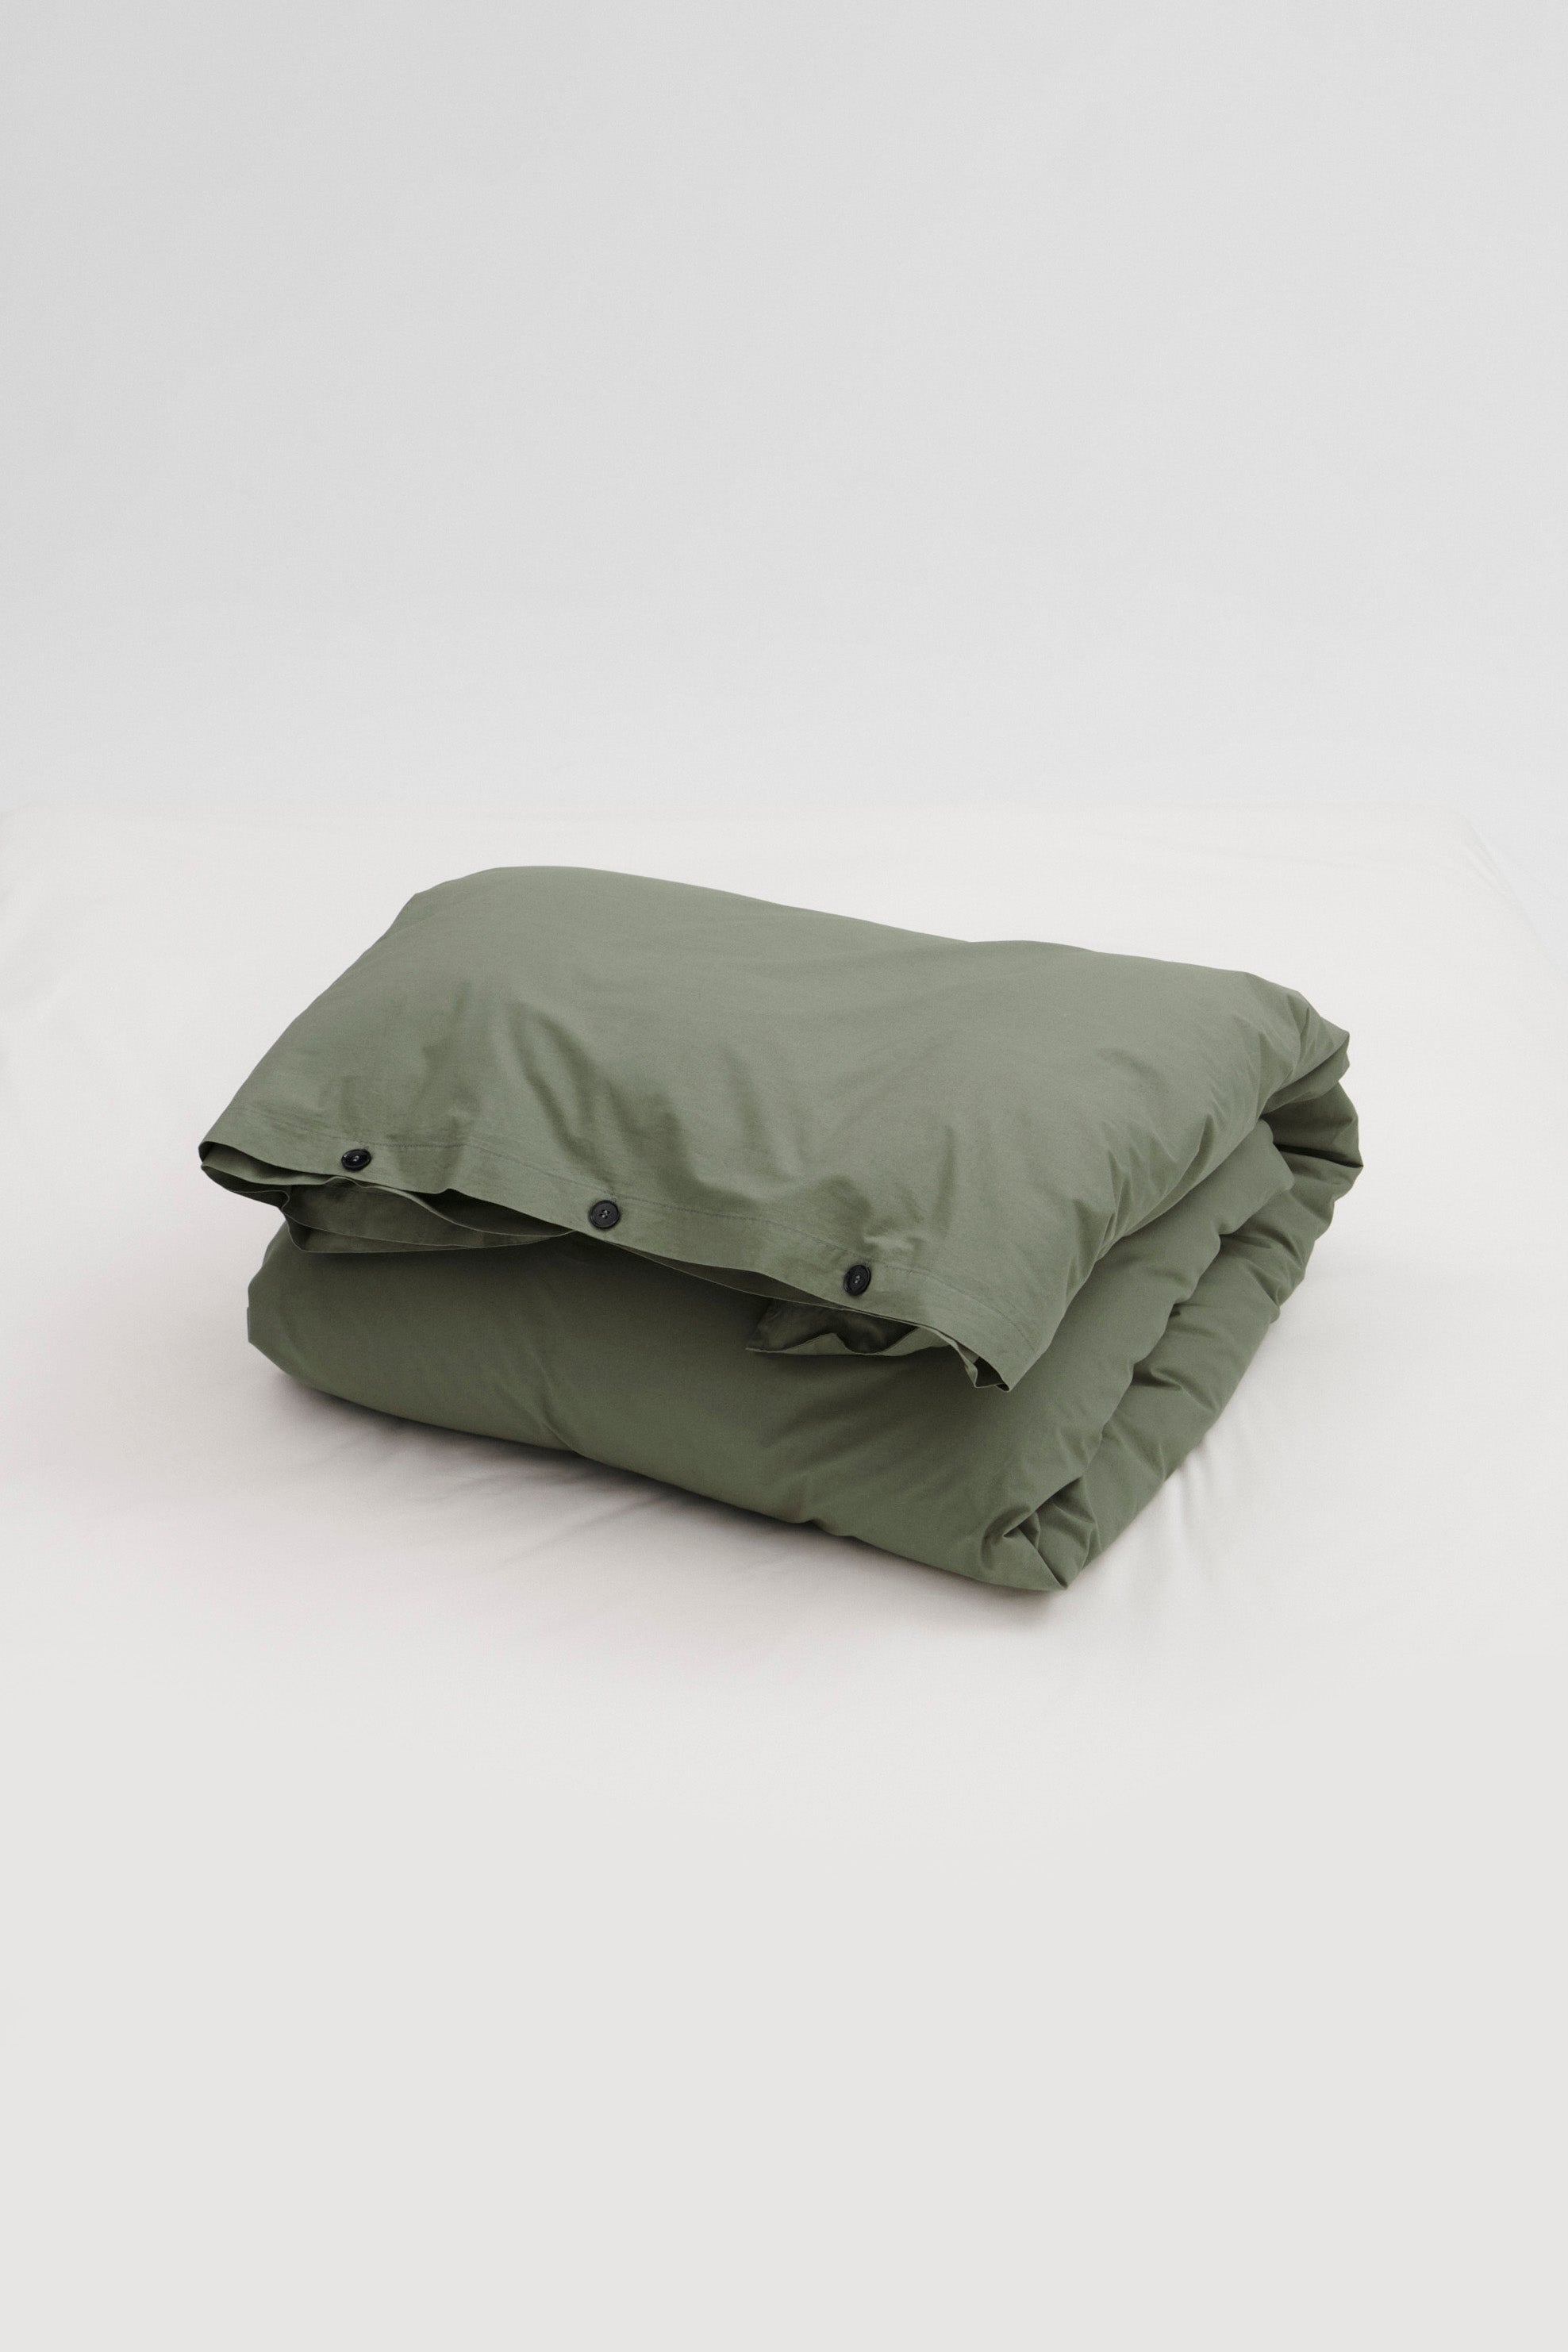 Percale King Duvet Olive Green